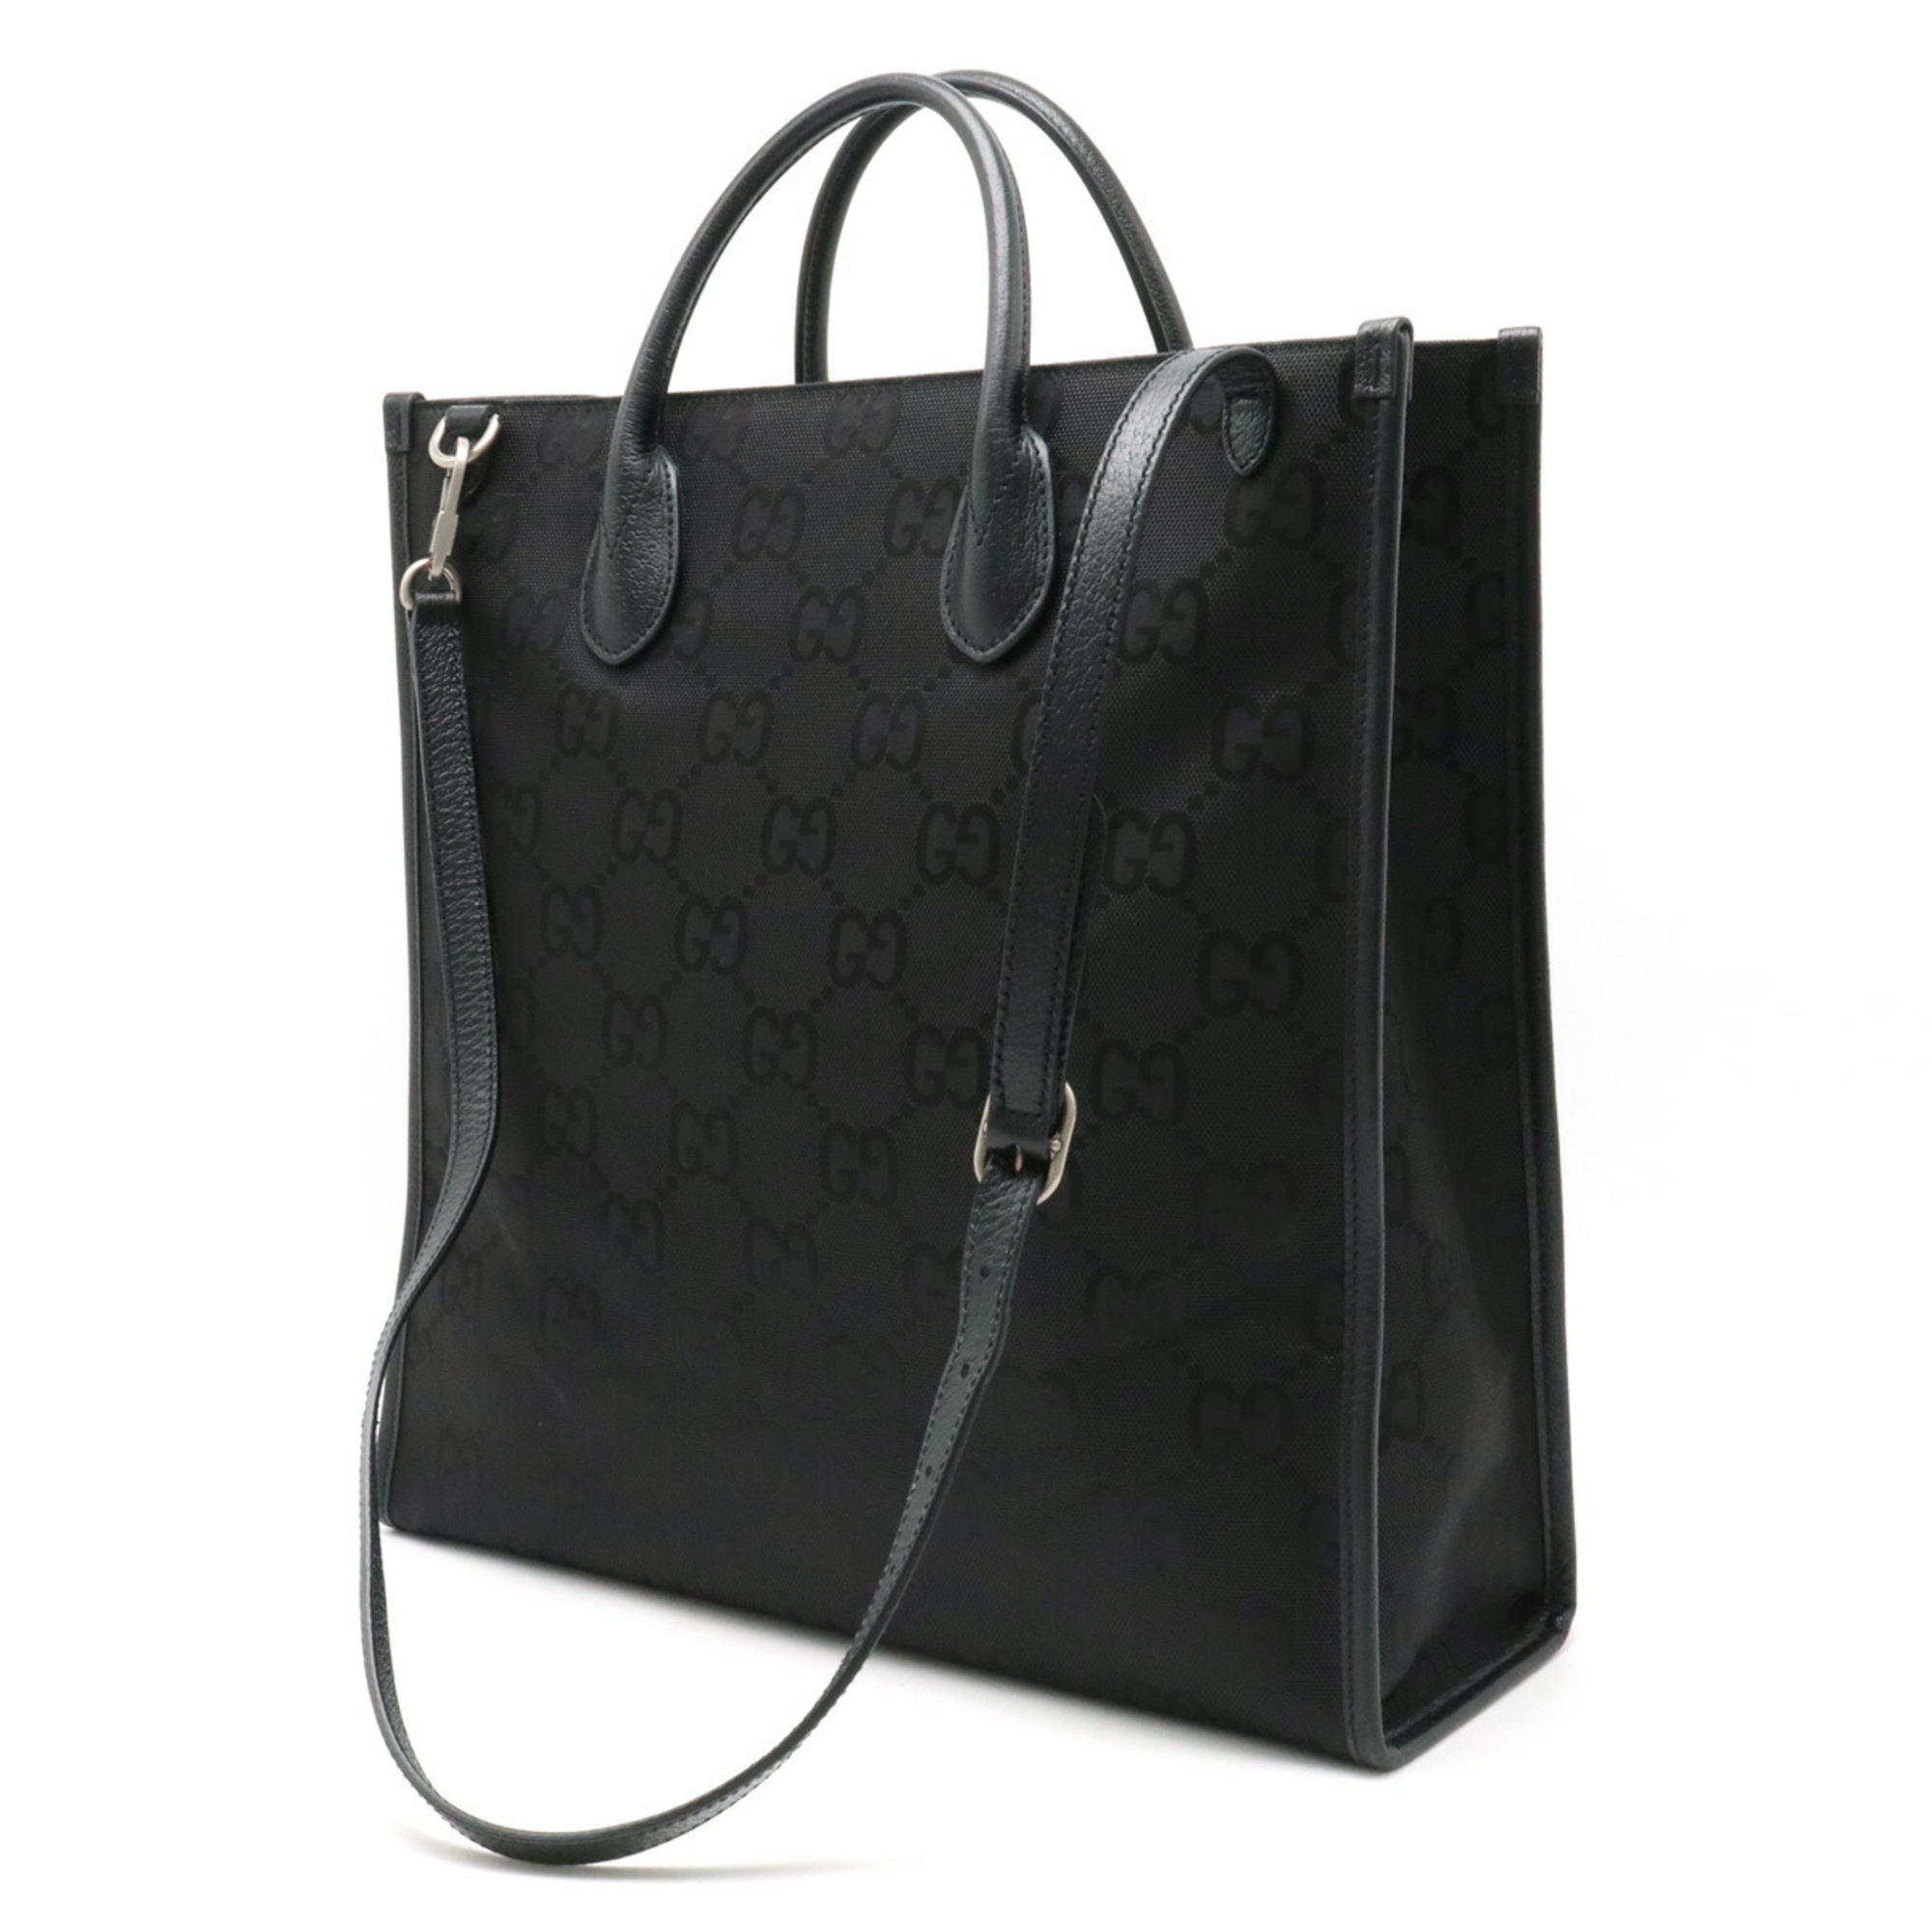 GUCCI Gucci Off The Grid Long Tote Bag Shoulder Nylon Canvas Leather Black 630355